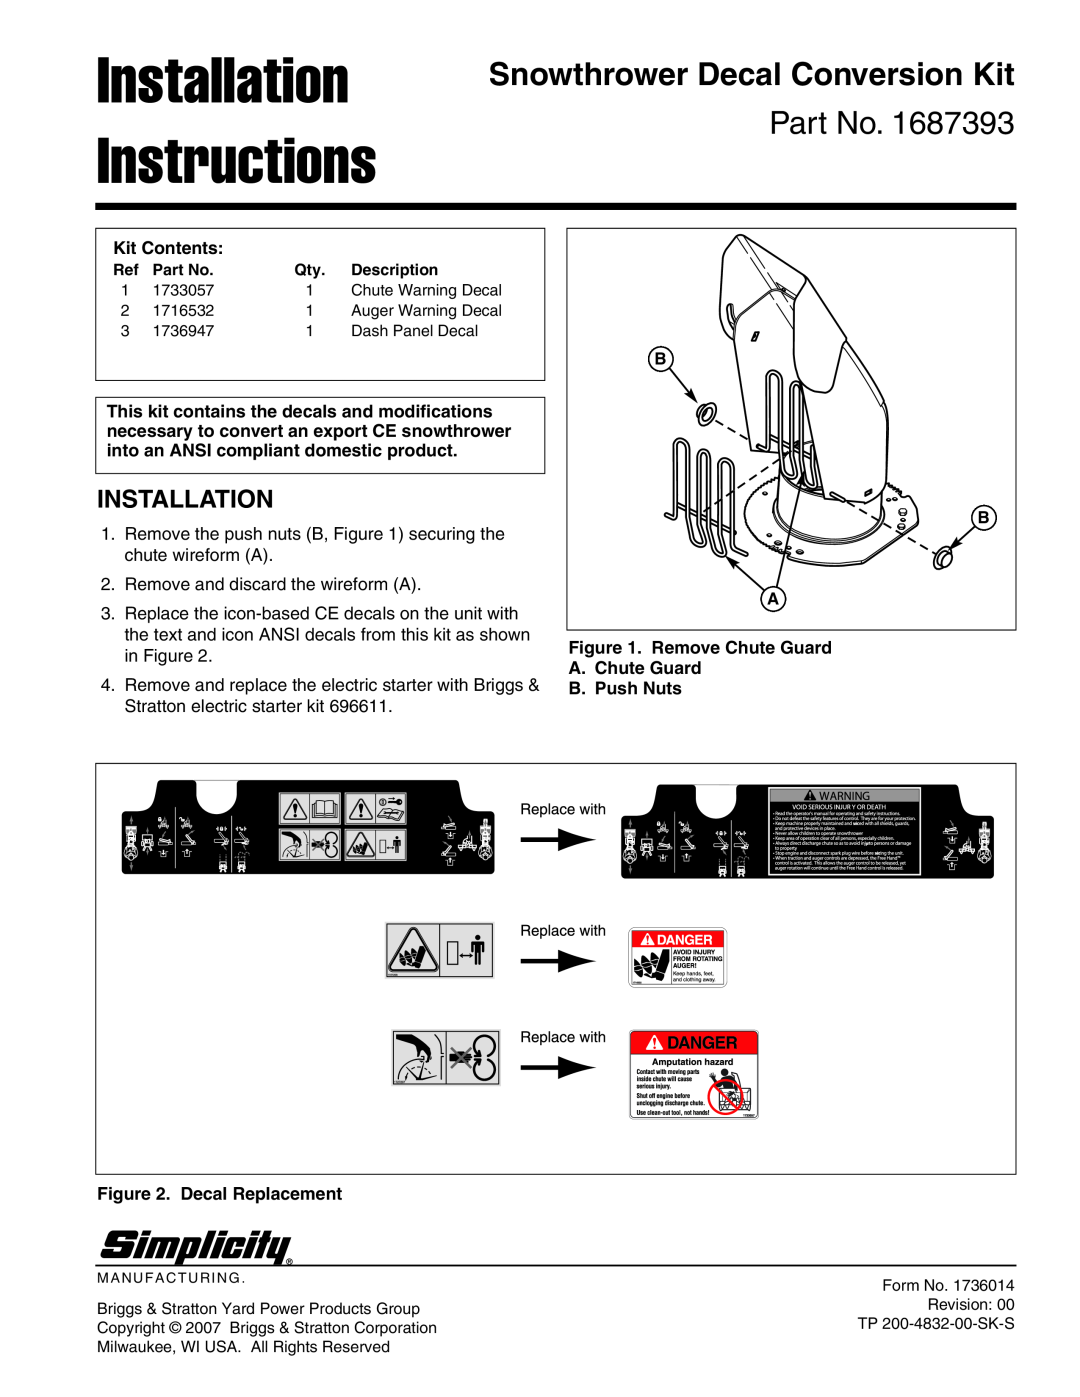 Simplicity 1687393 installation instructions Installation Instructions, Snowthrower Decal Conversion Kit, Kit Contents 